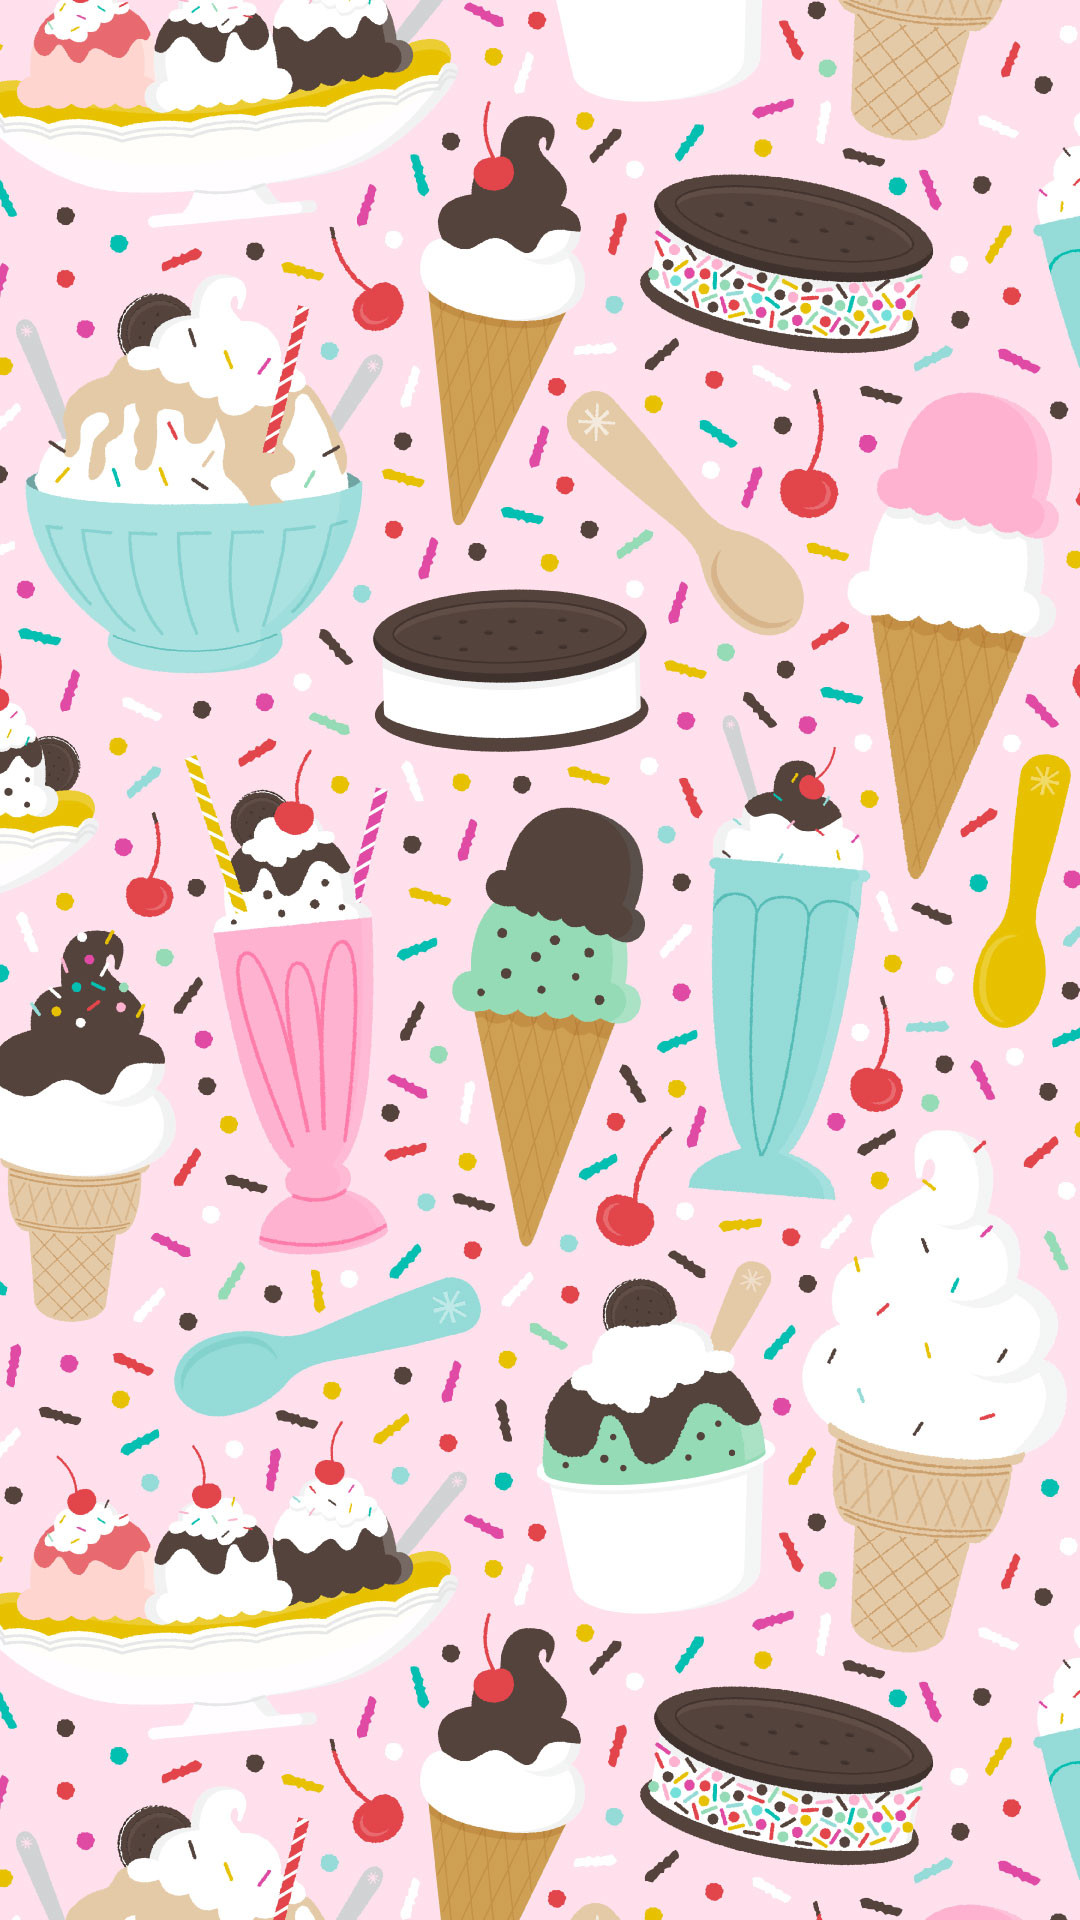 Download wallpaper 1280x2120 ice cream waffle cones summer iphone 6  plus 1280x2120 hd background 5114